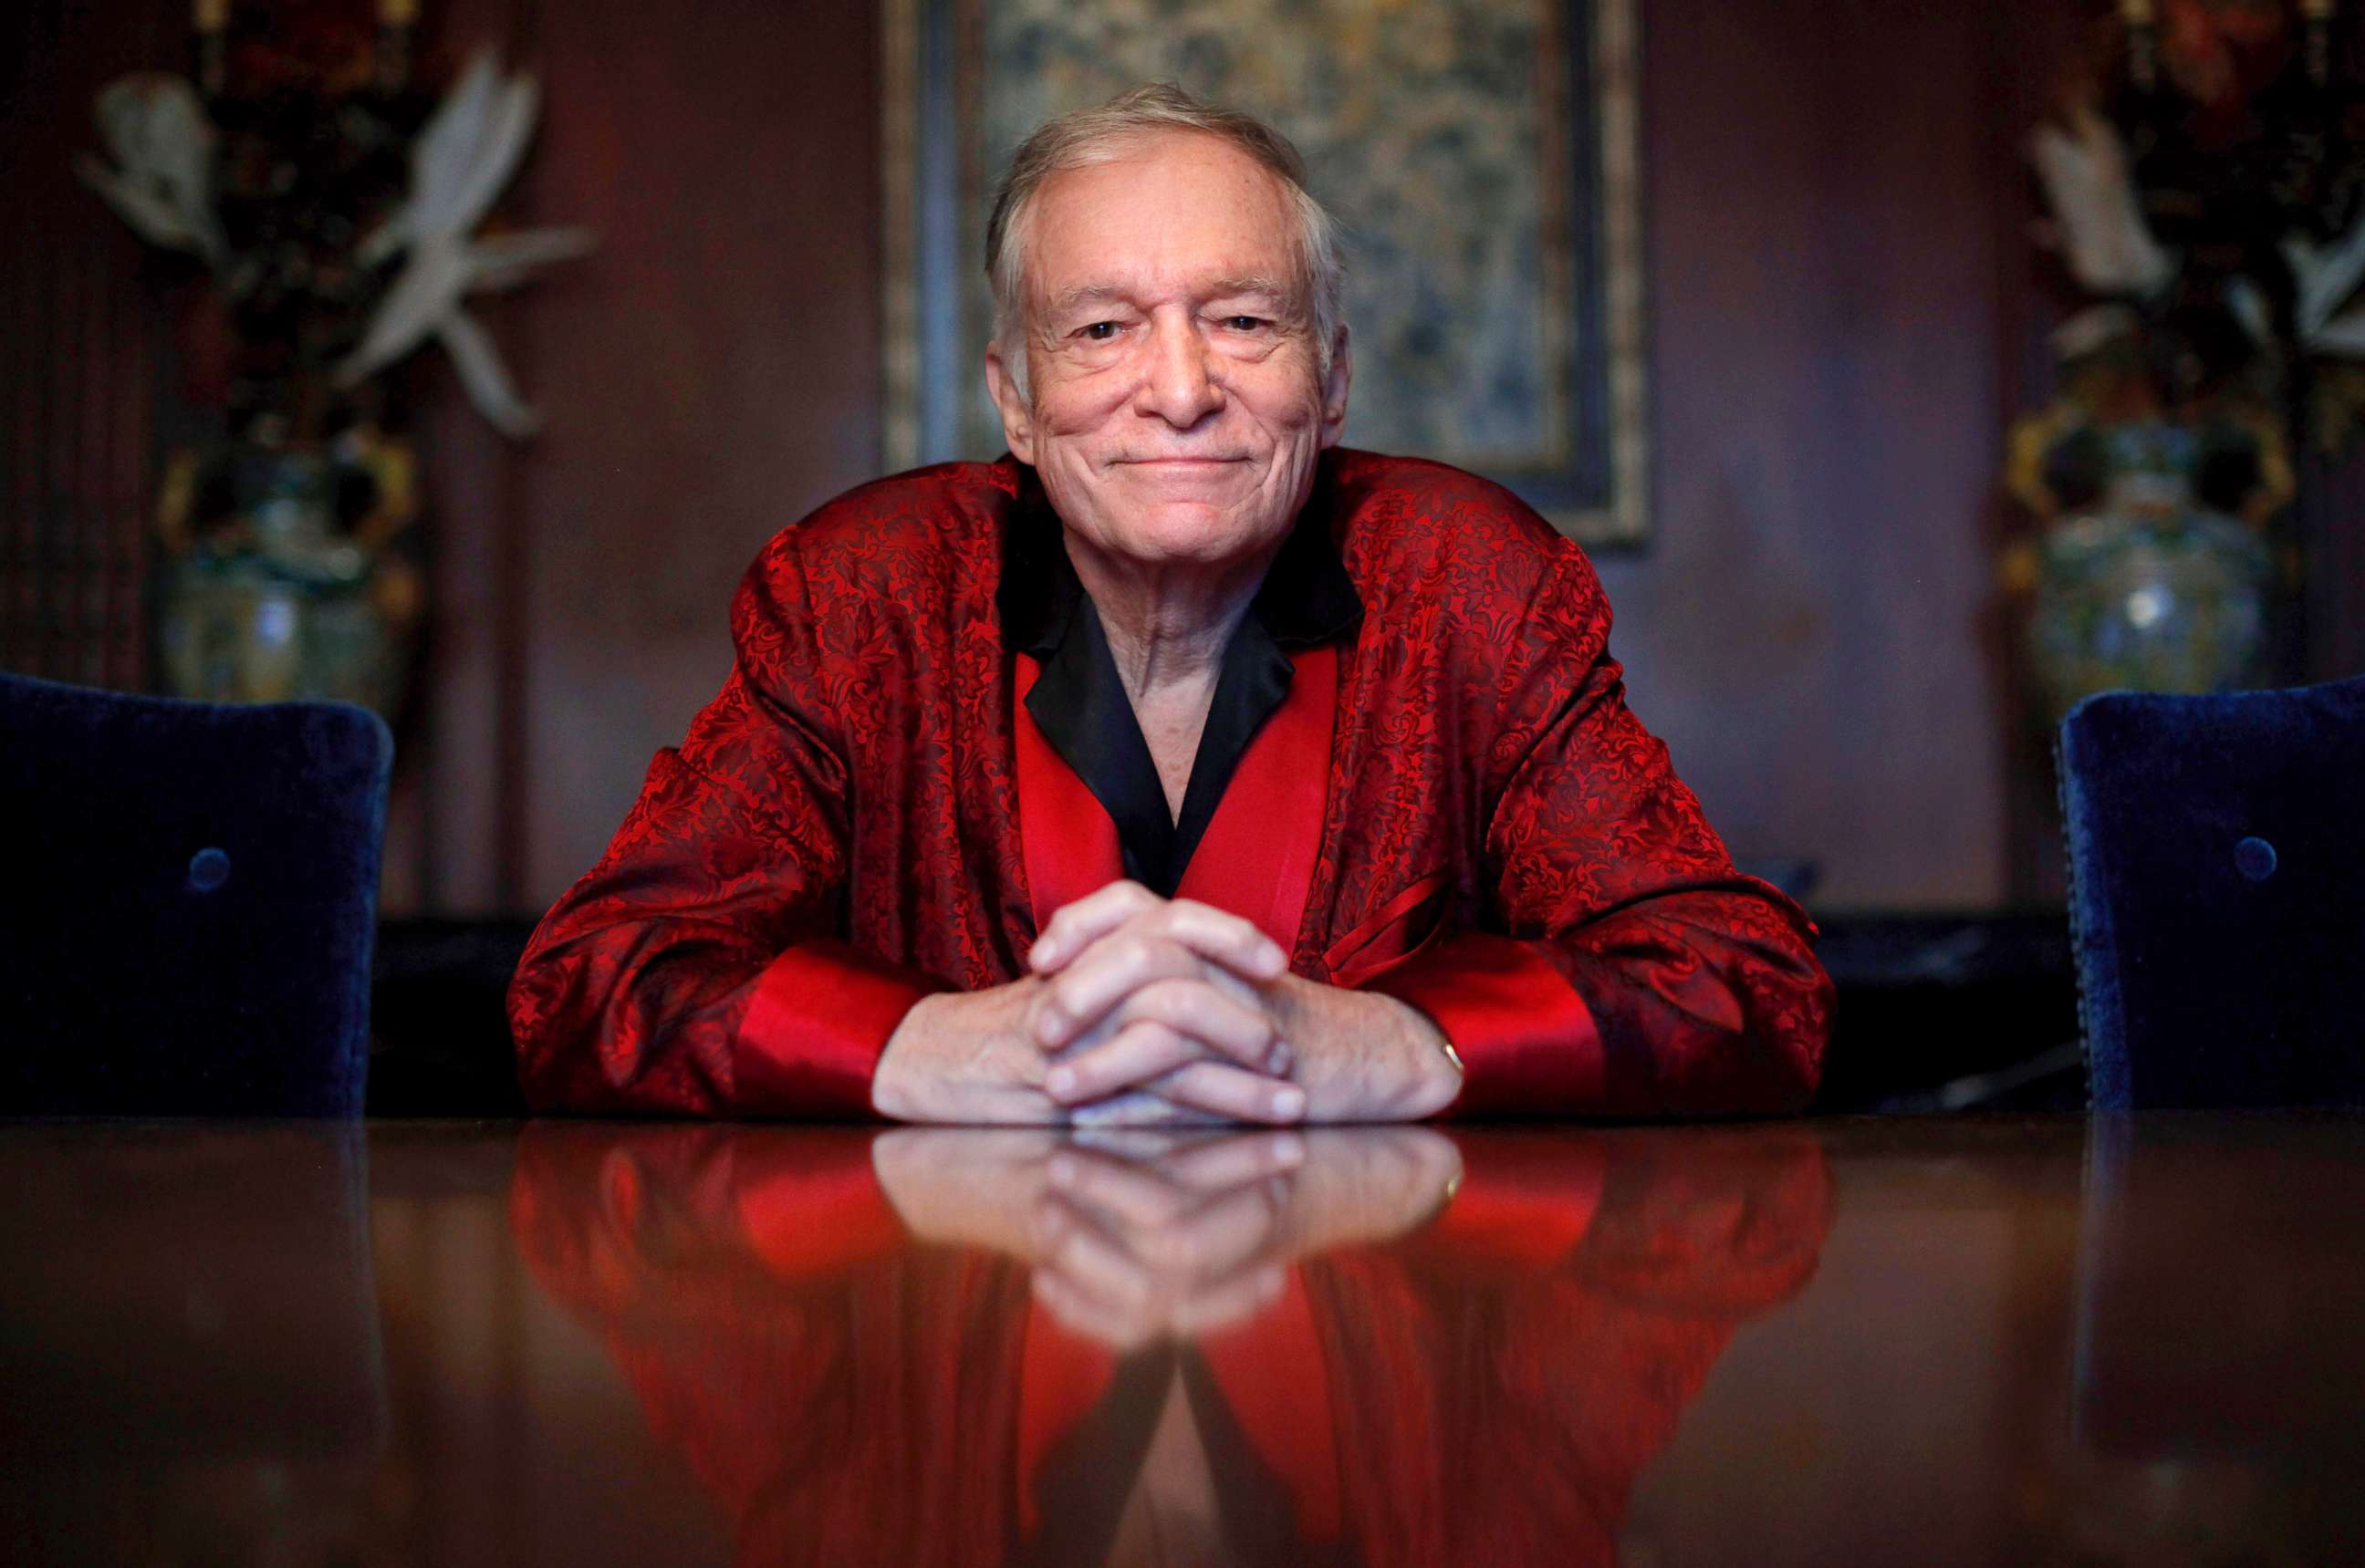 PHOTO: Playboy magazine founder Hugh Hefner poses for photos at the Playboy Mansion in Los Angeles, Nov. 4, 2010. 